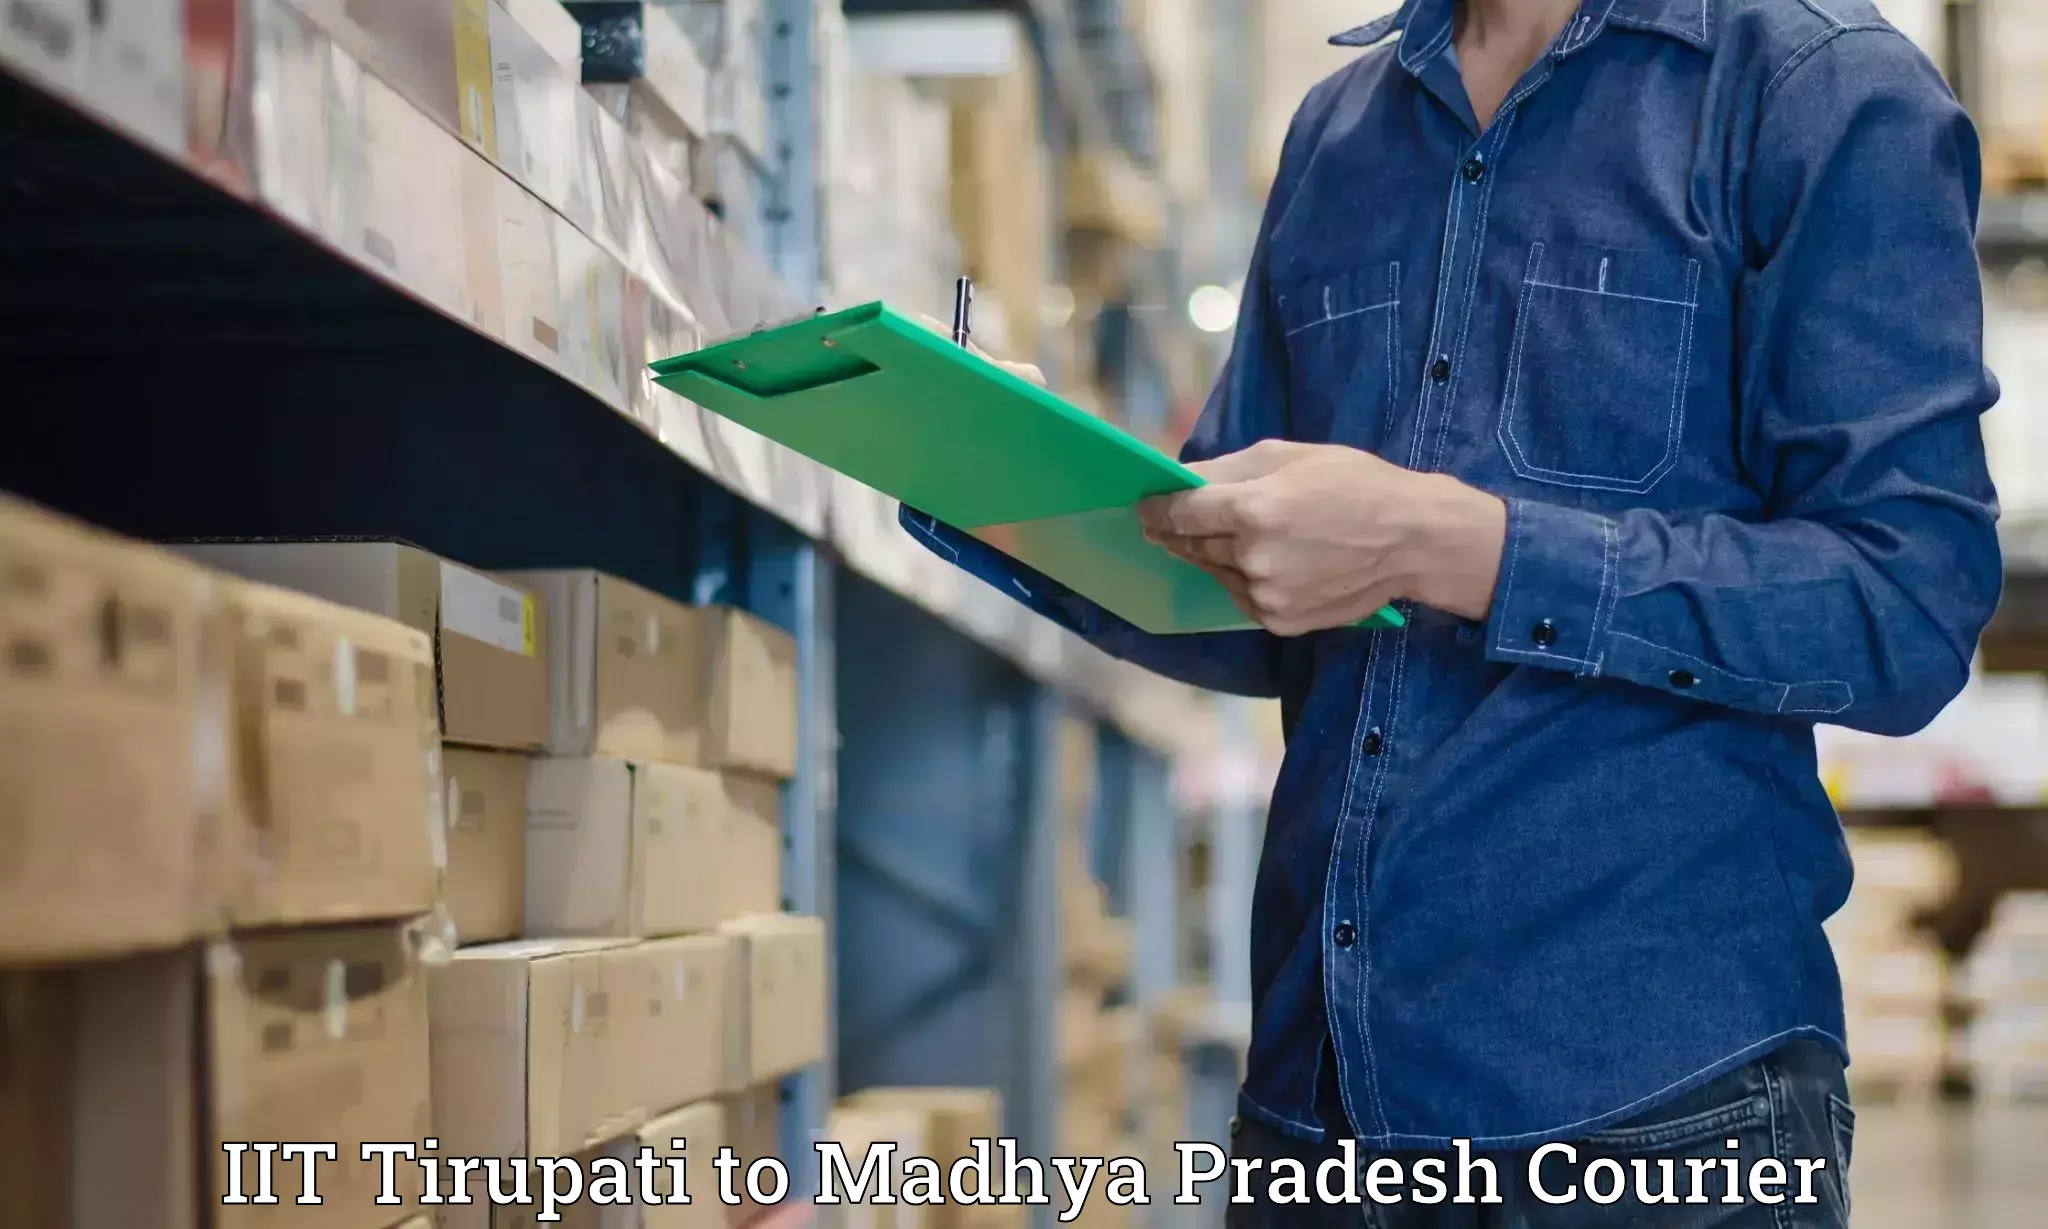 On-call courier service IIT Tirupati to Ghugri